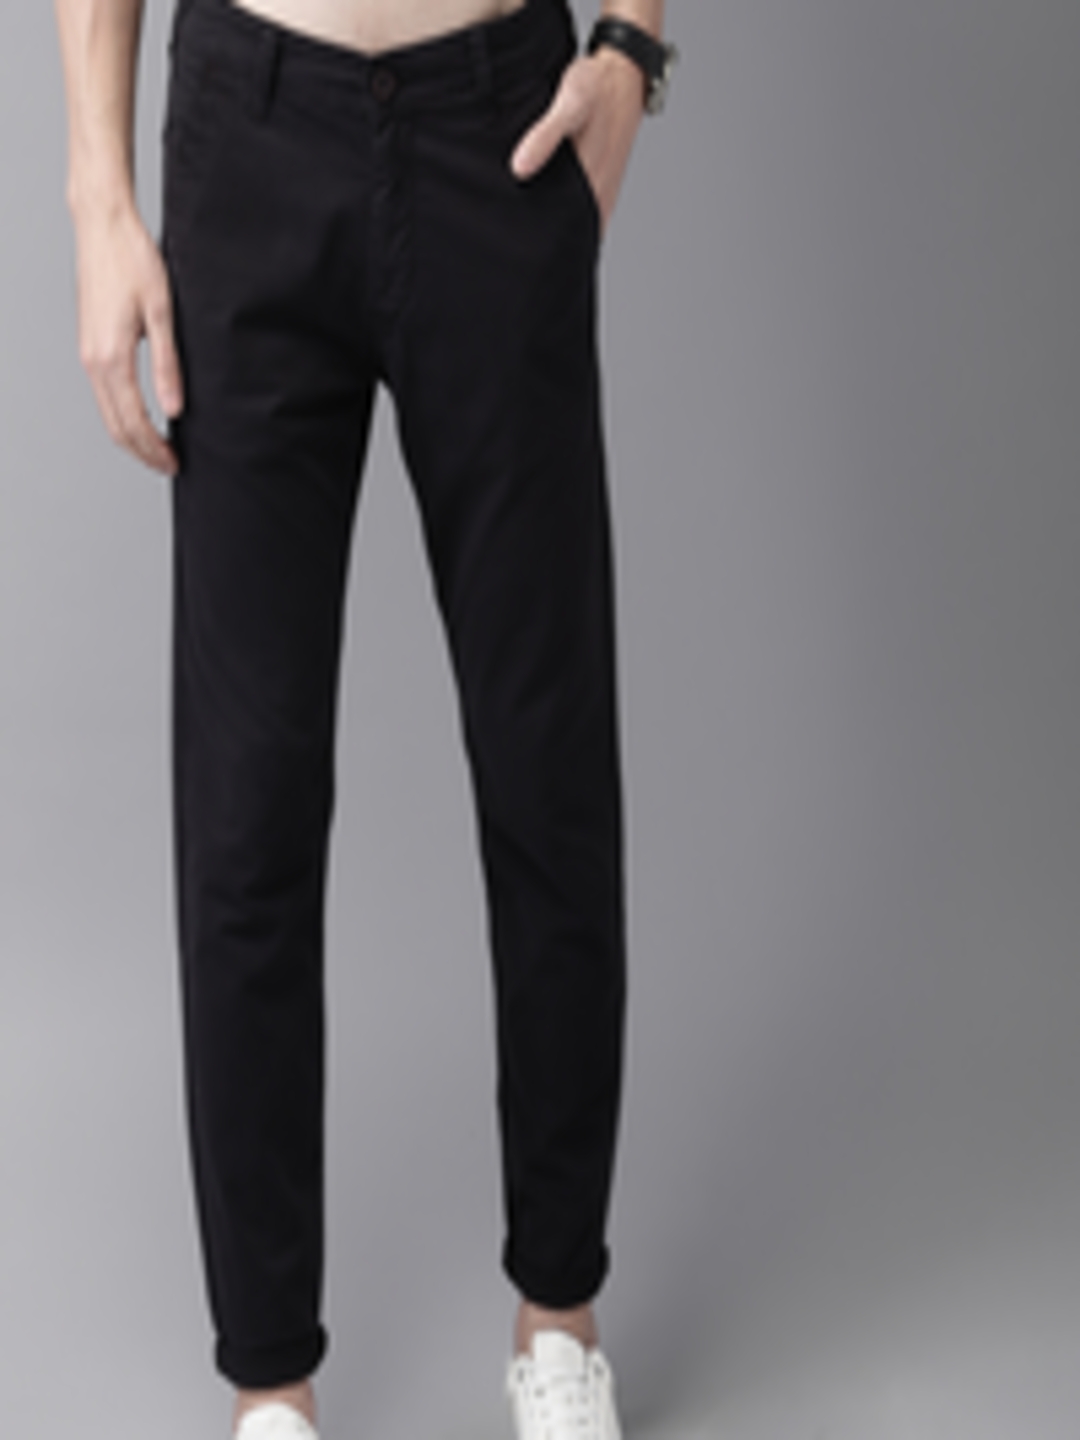 Buy HERE&NOW Men Black Slim Fit Solid Chinos - Trousers for Men 9089131 ...